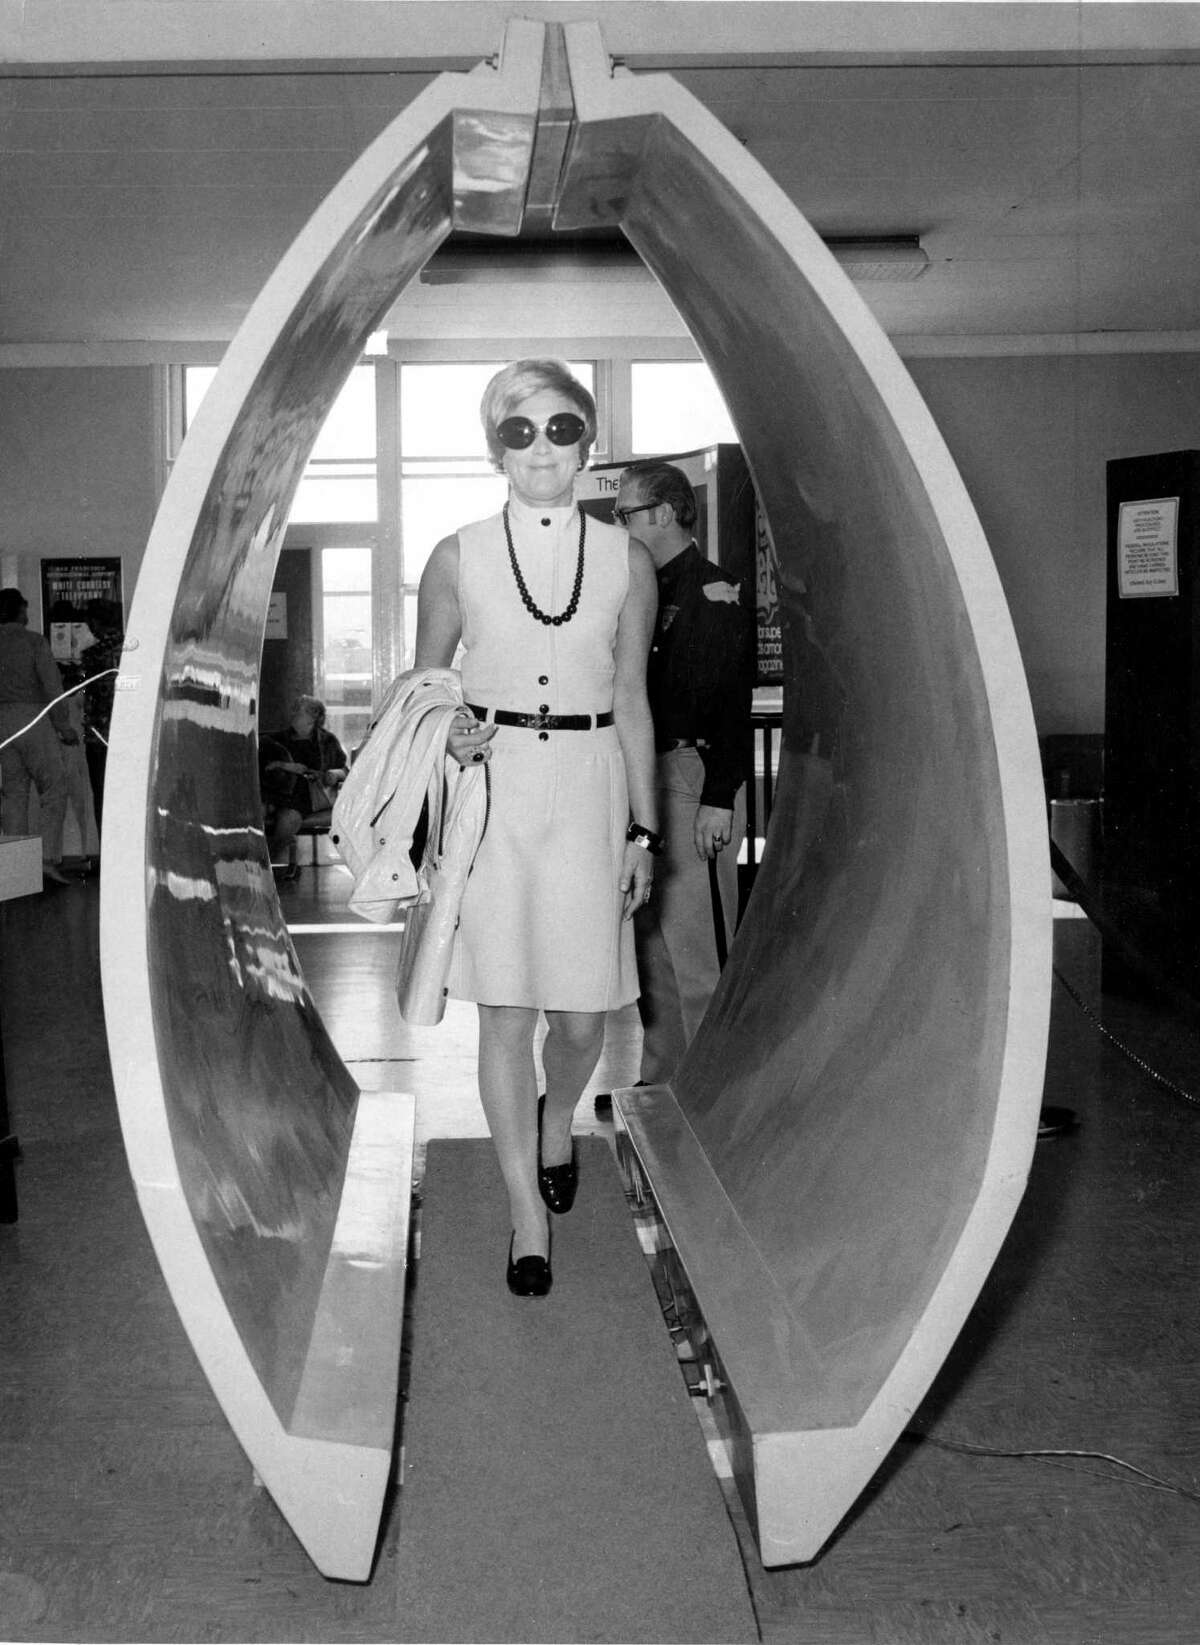 Mrs. Donald Pritzker walks through a metal detector as part of a security check at San Francisco International Airport in 1973.